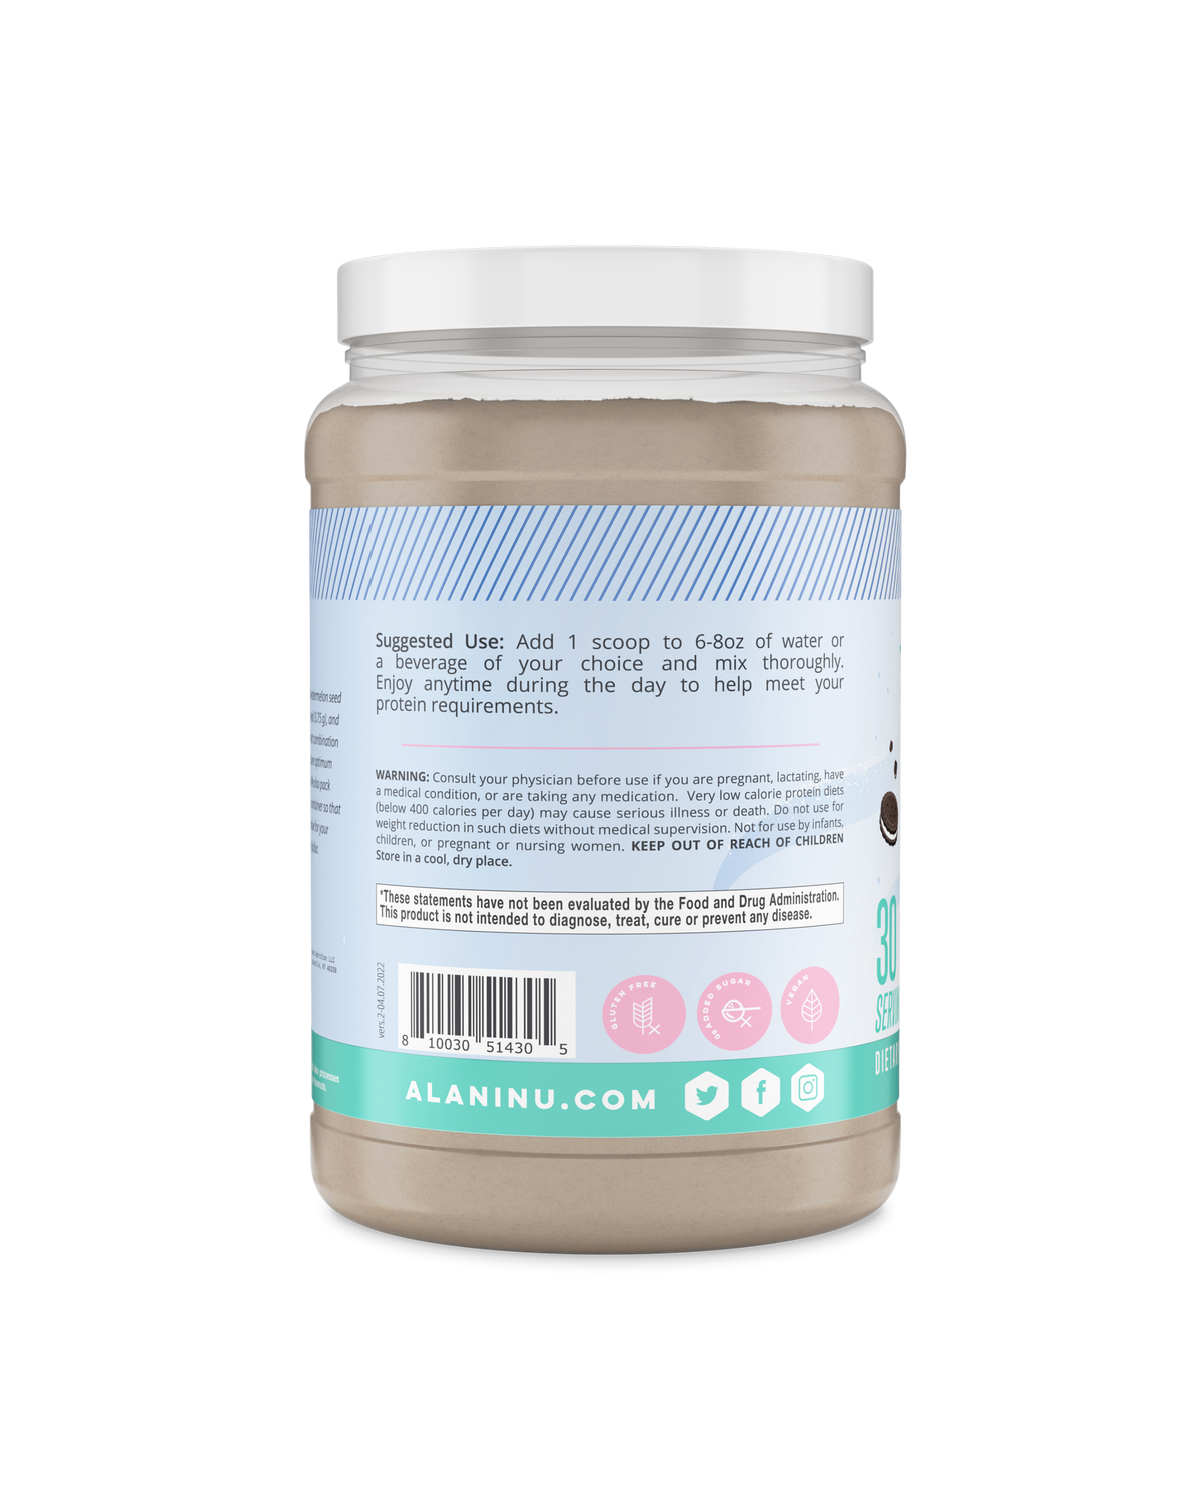 Alani Nu Munchies Whey Protein 30 Servings